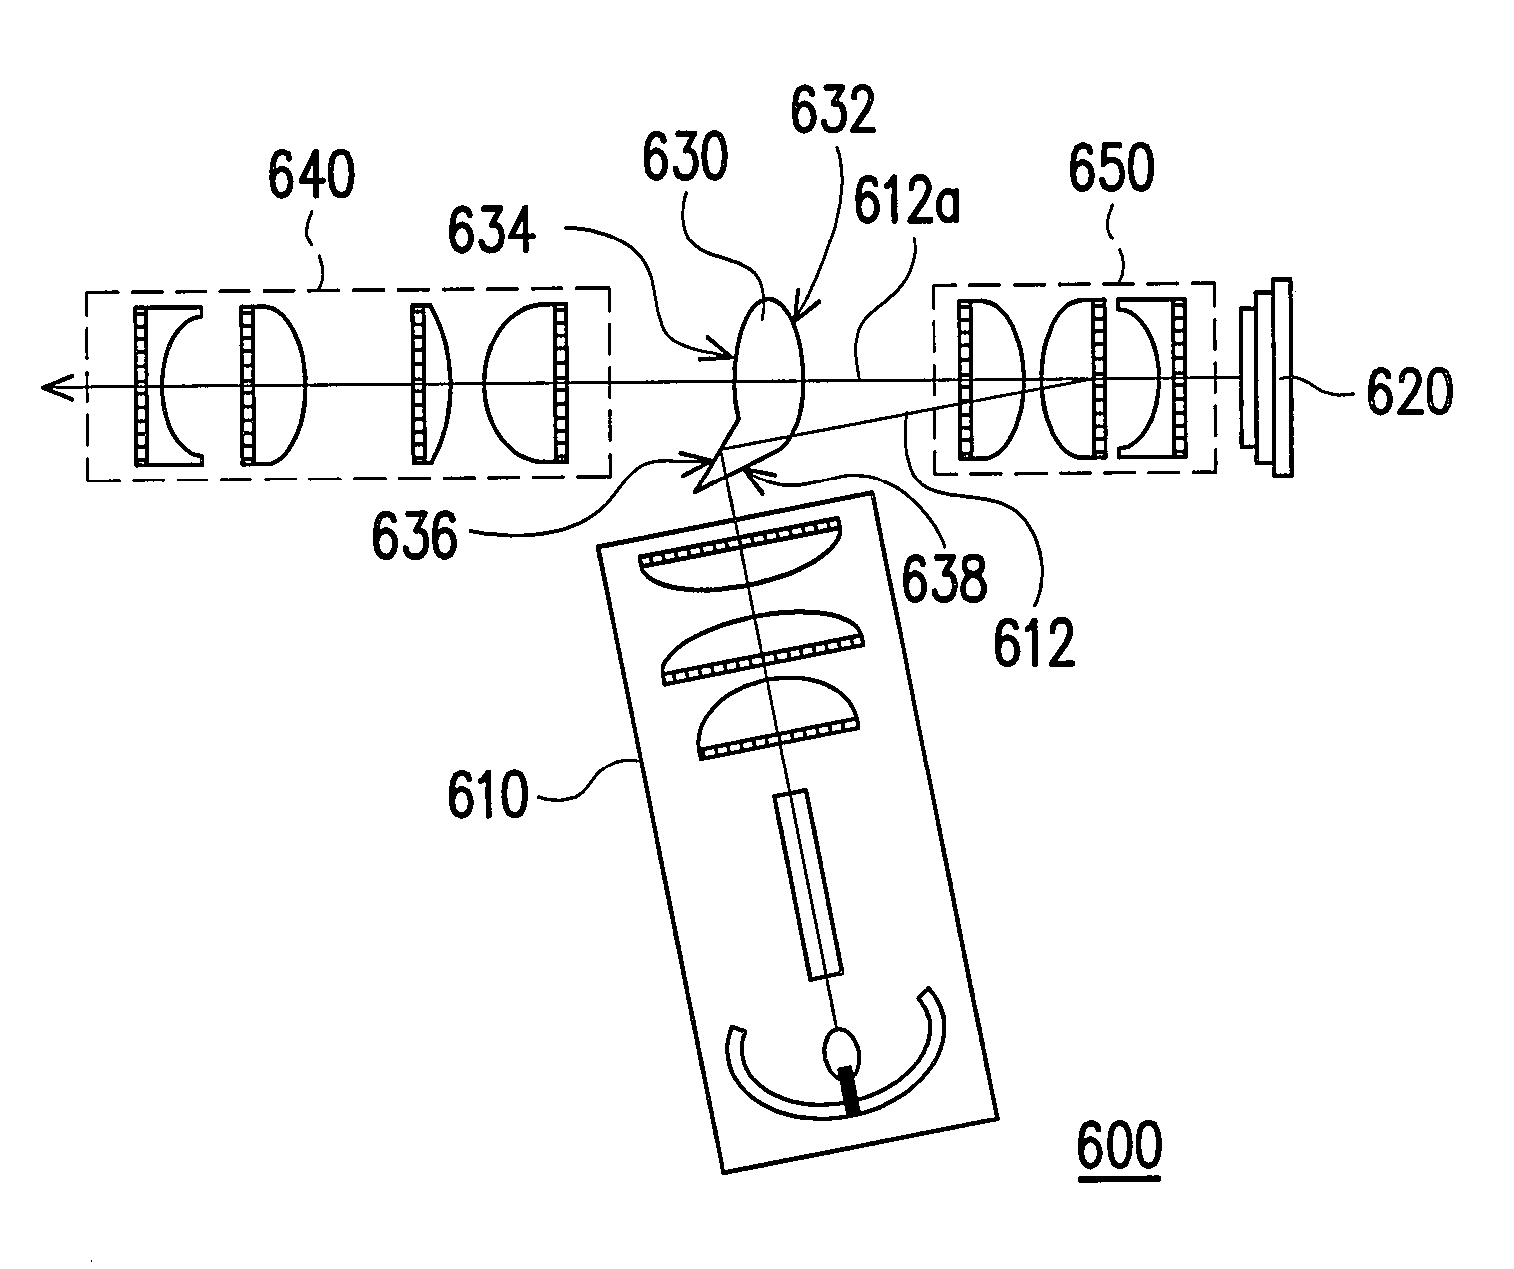 Optical projection apparatus